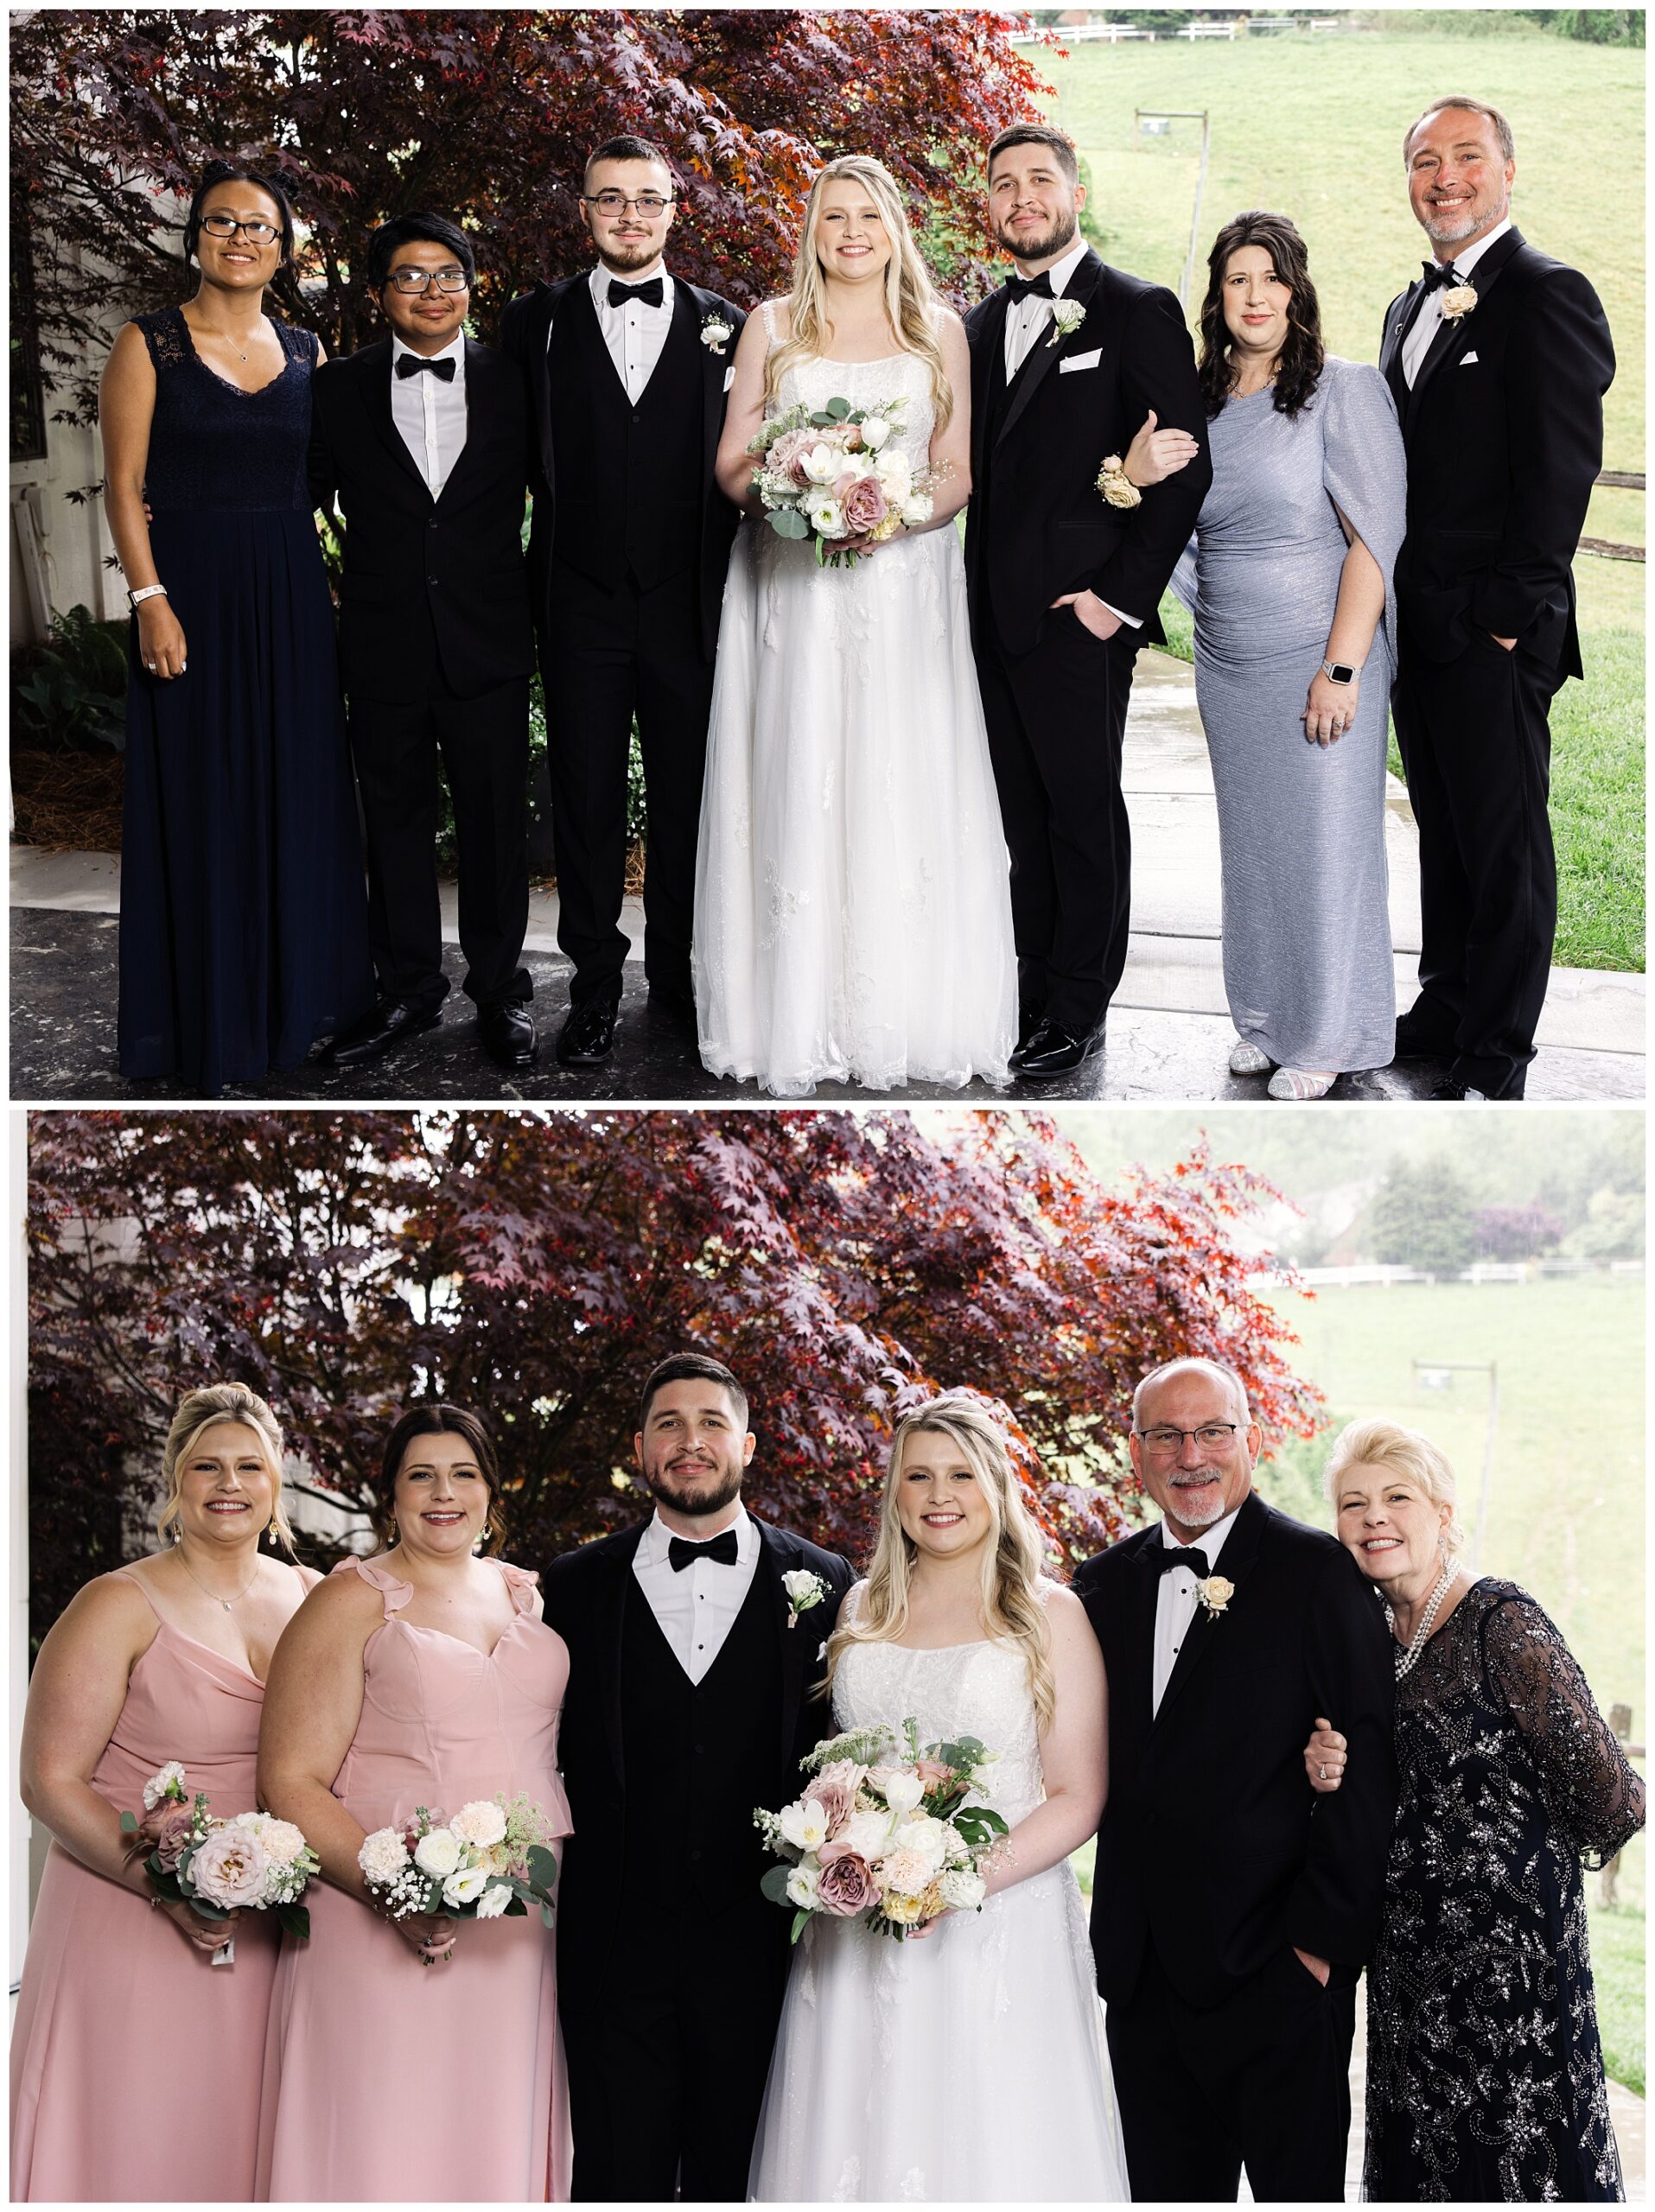 Two wedding group photos featuring a bride and groom with their guests, taken outdoors in the mountain rain and indoors at Chestnut Ridge against different backdrops.